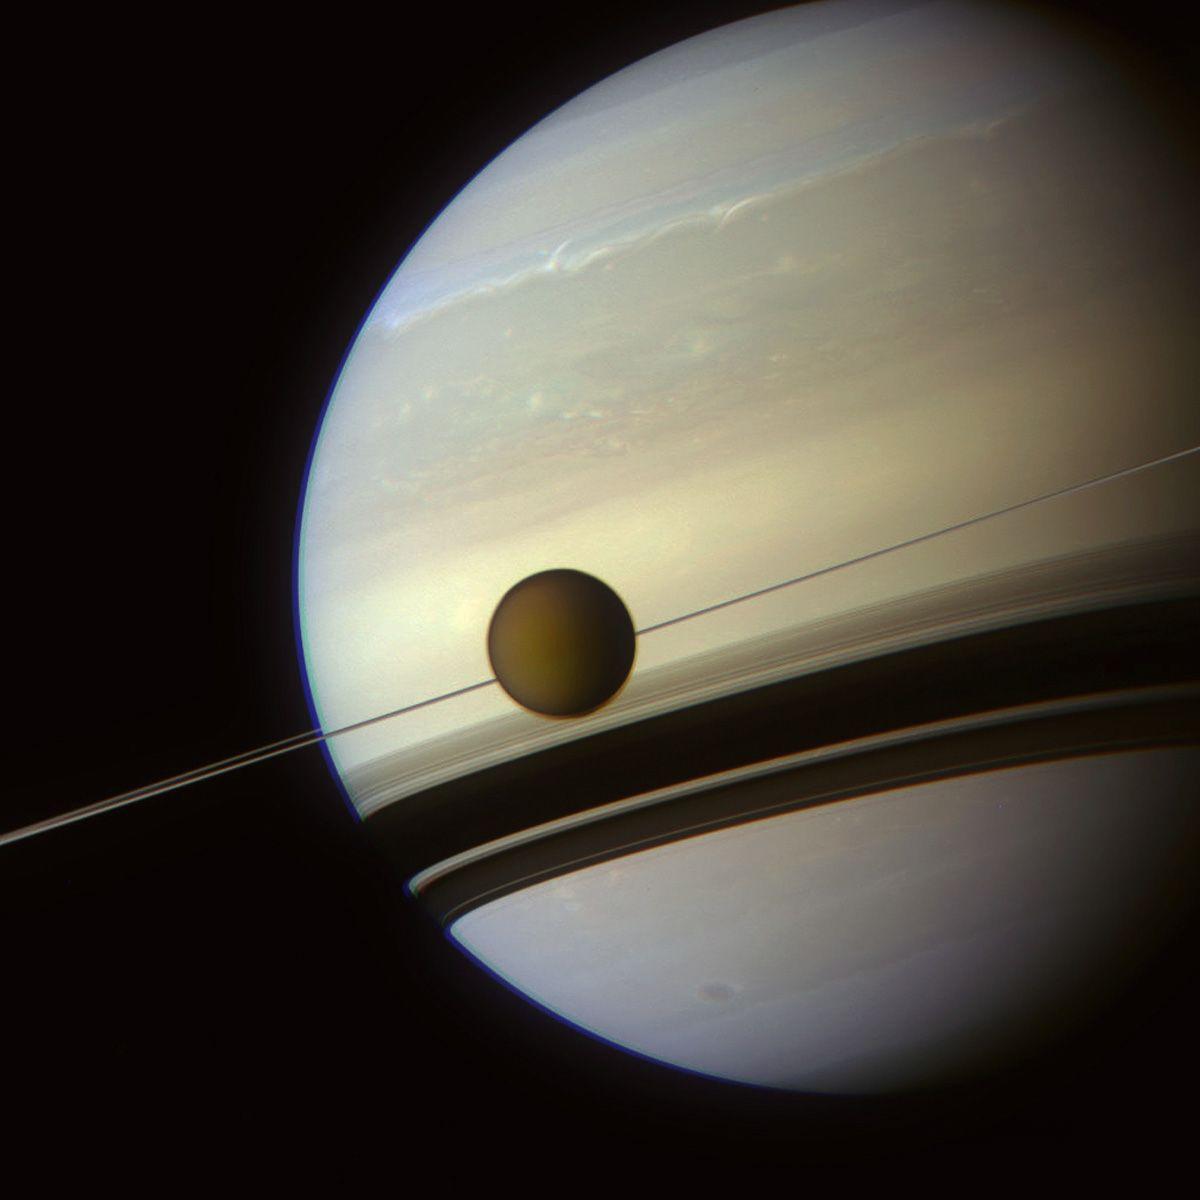 the shadows of Saturn's rings